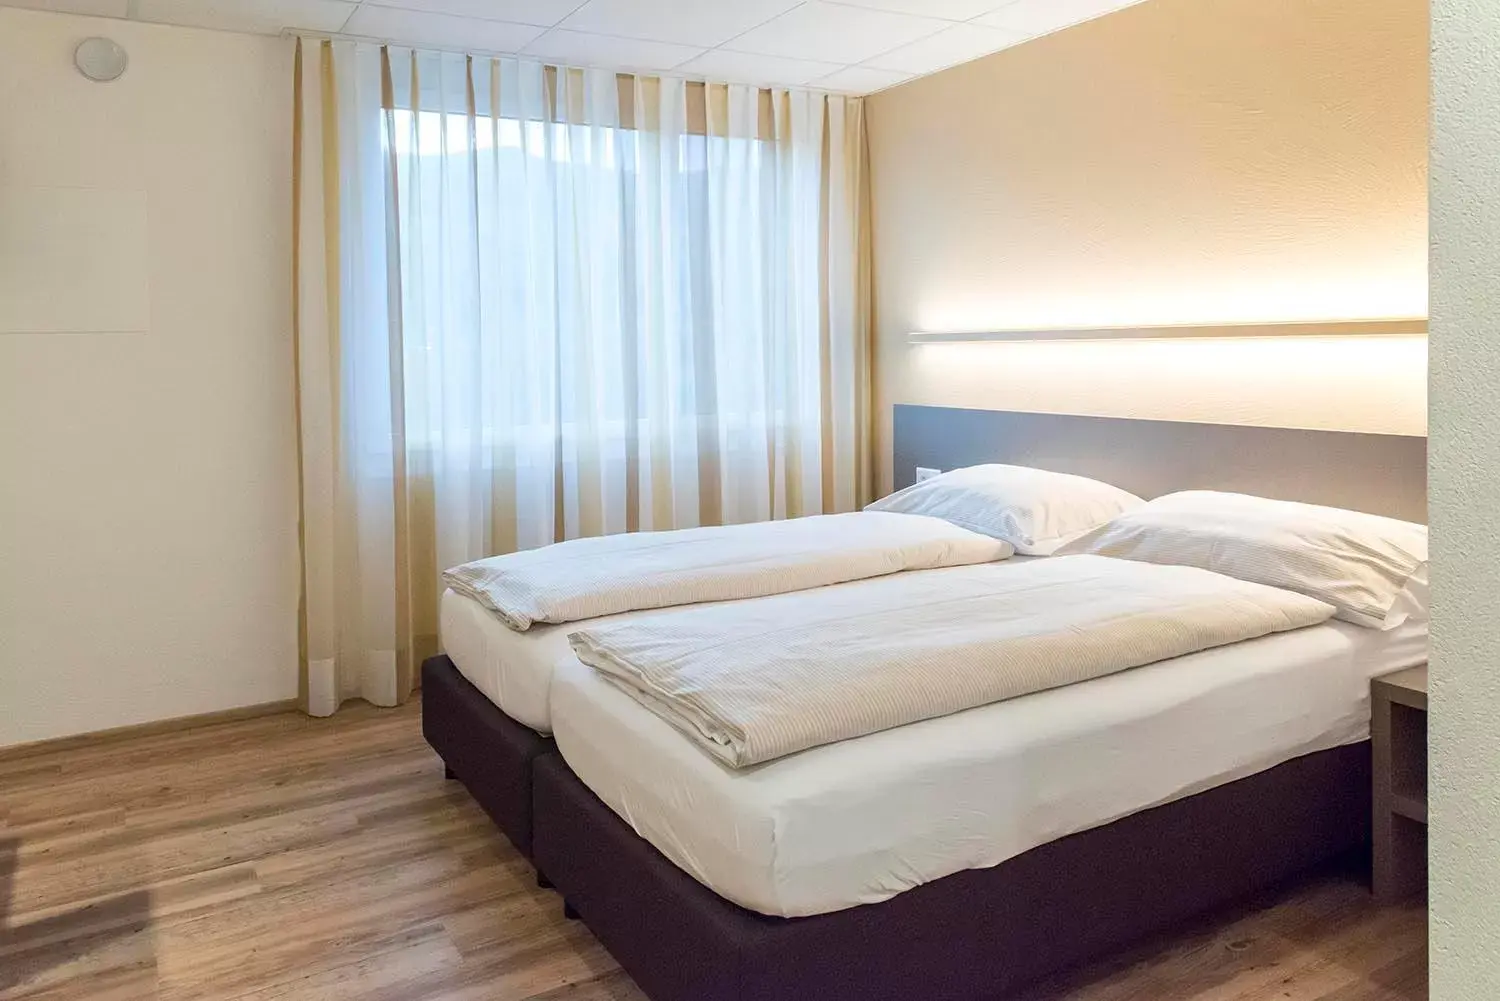 Staff, Bed in Hotel am Kreisel: Self-Service Check-In Hotel